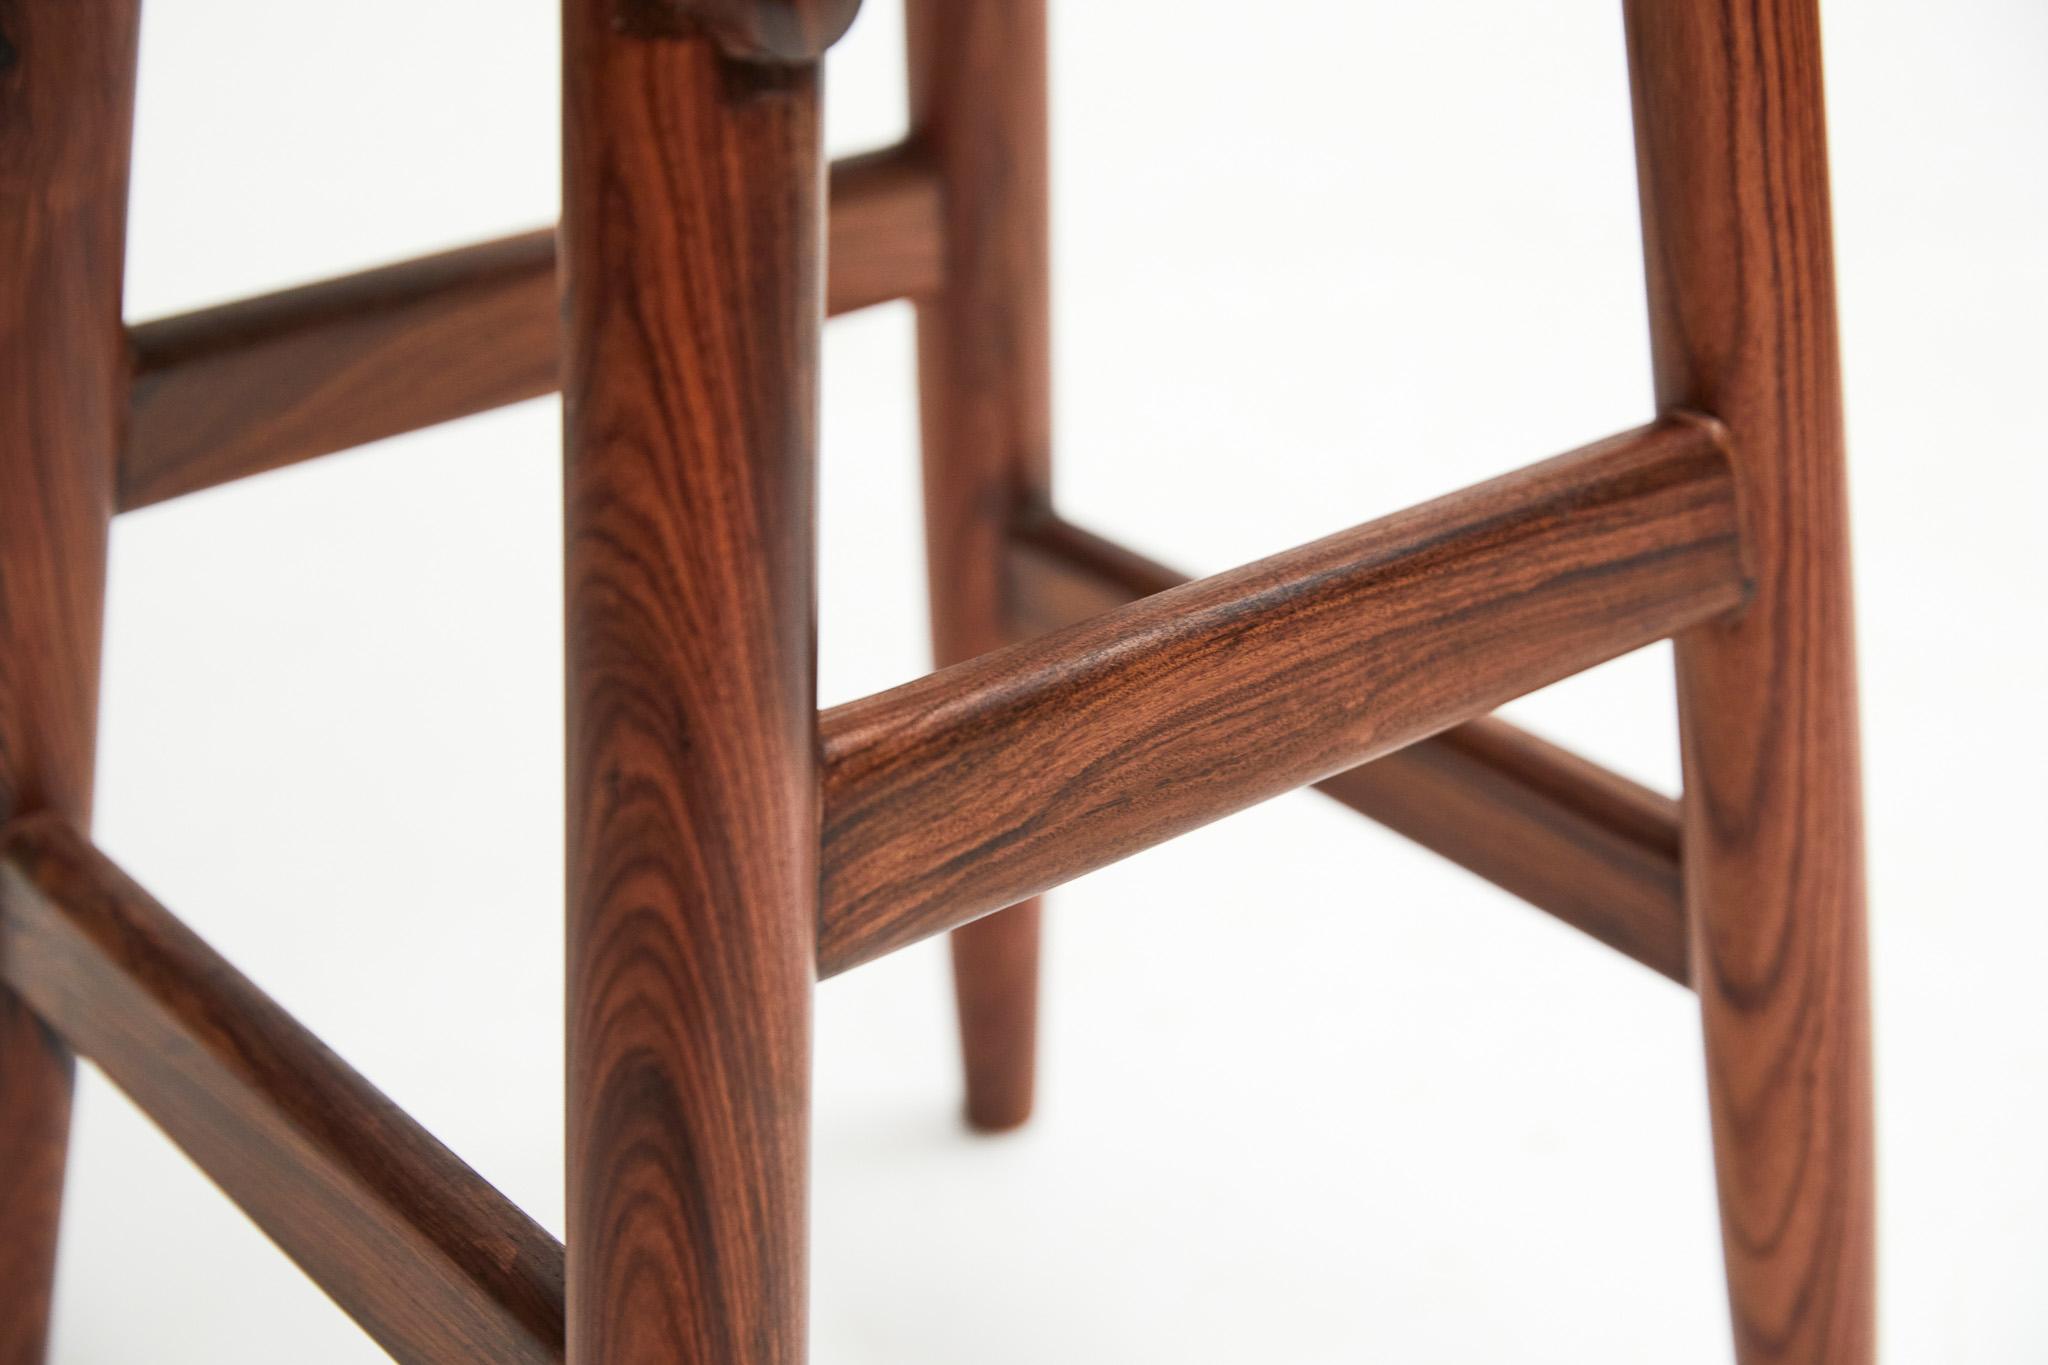 Contemporary Brazilian Stool Nina in Lyptus Wood by Sergio Rodrigues, c. 2000, Brazil For Sale